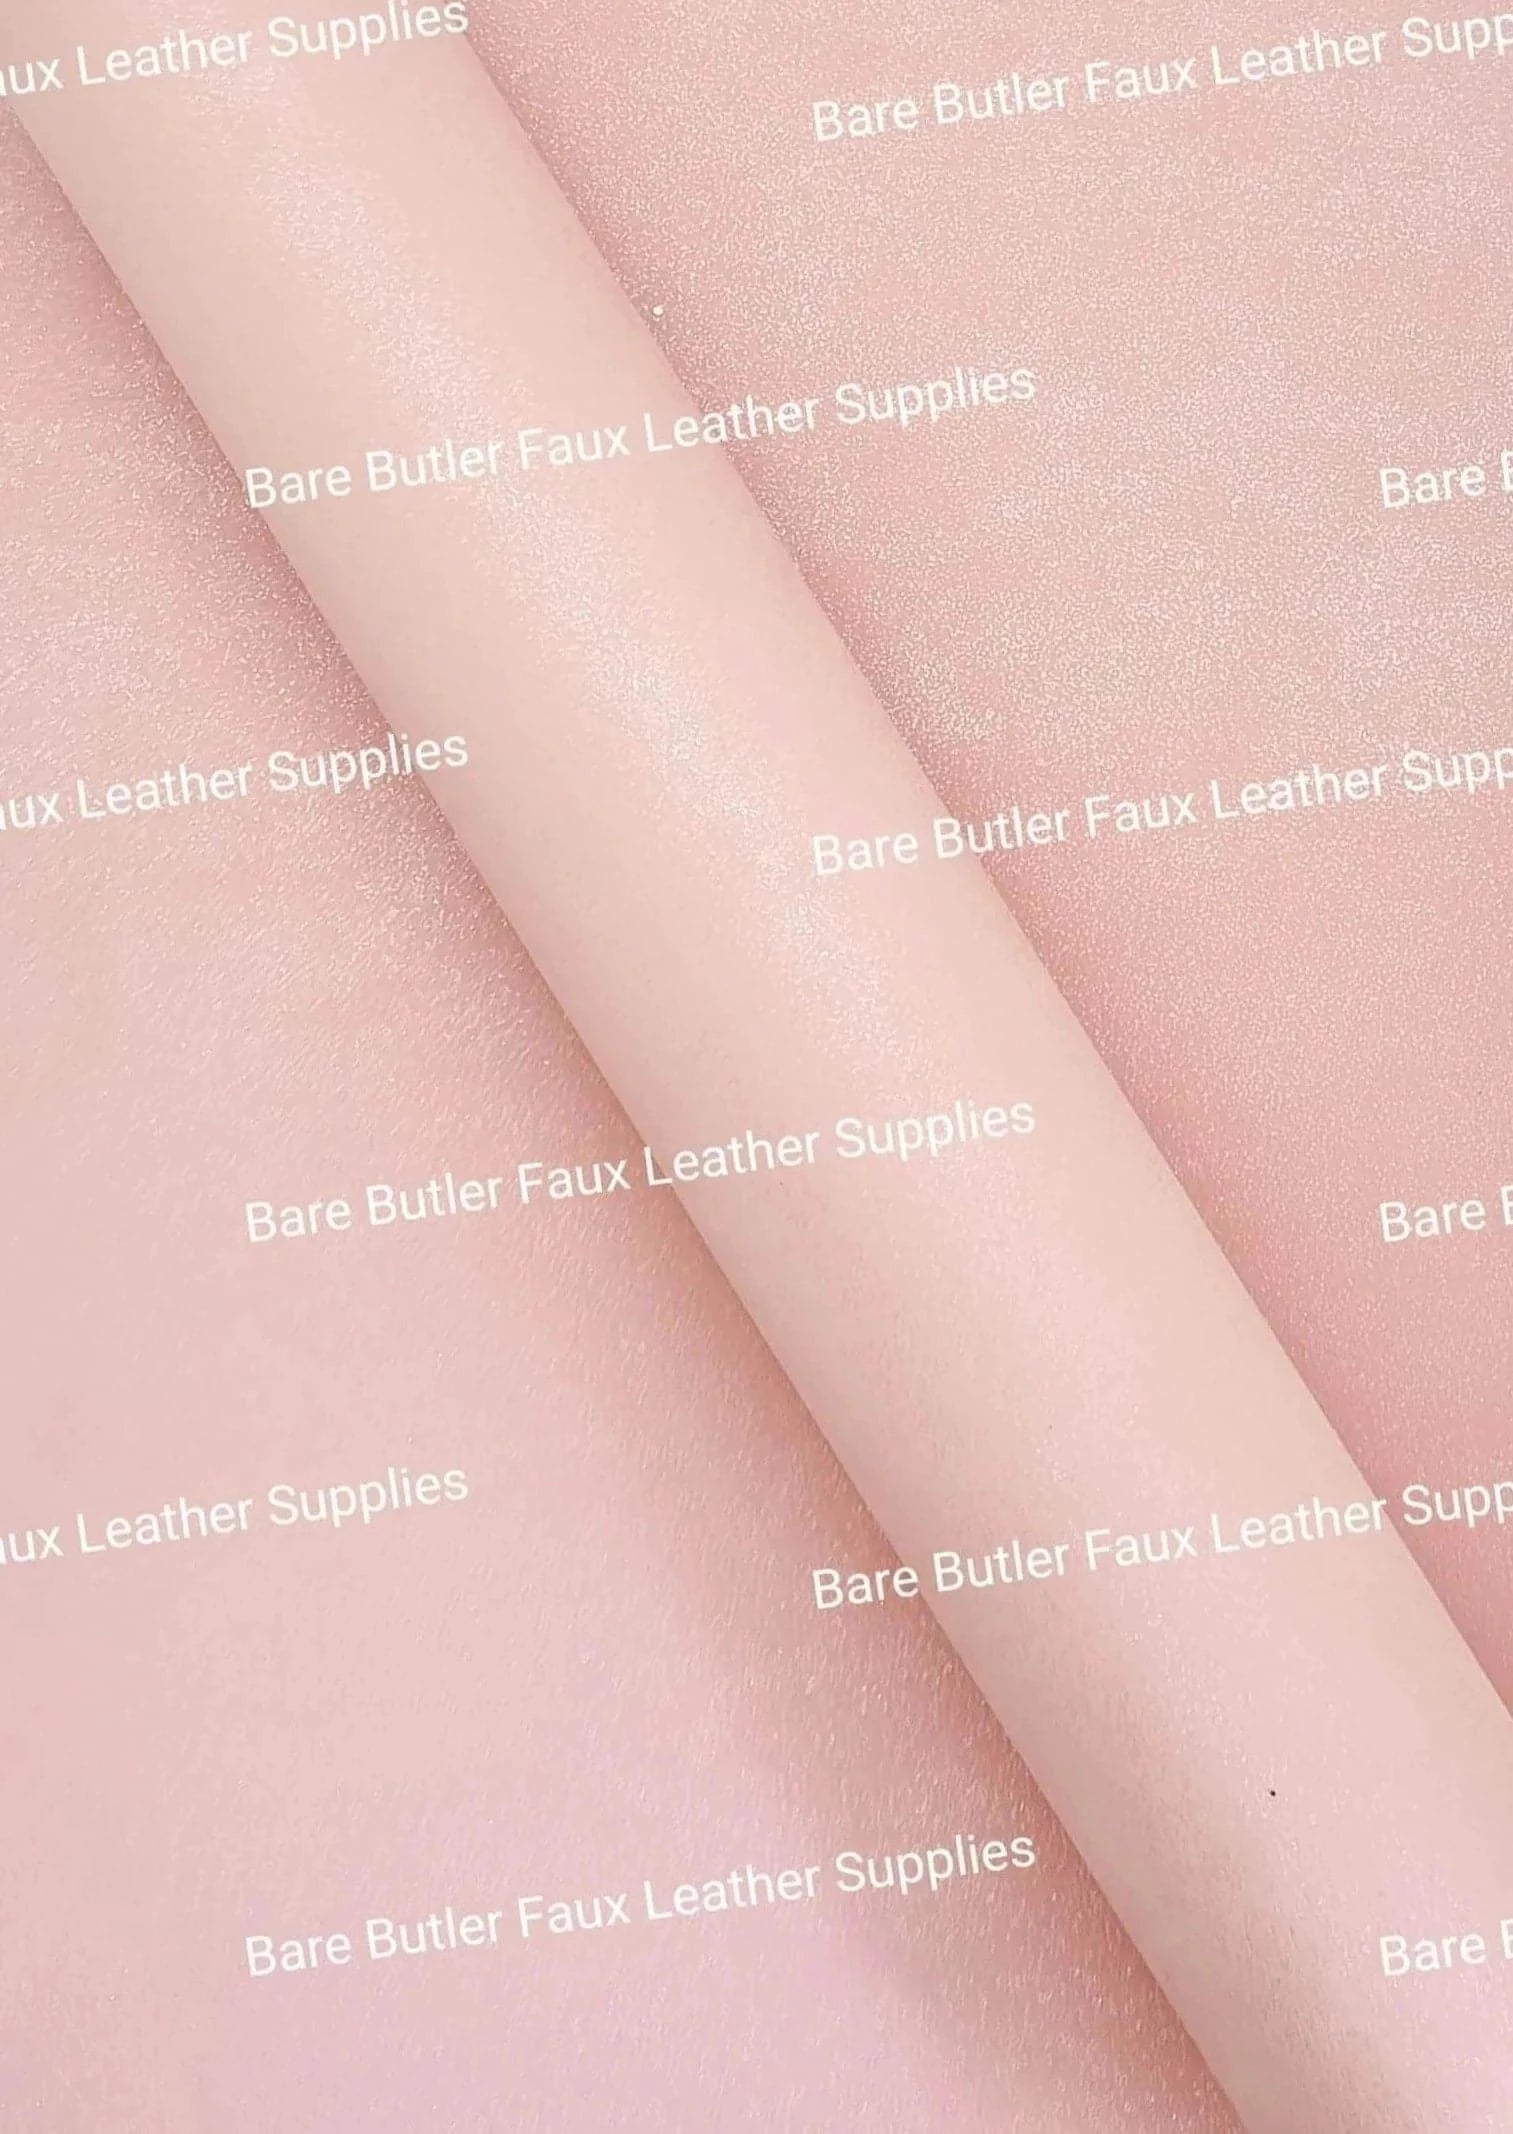 Glitter Suede - Peach - Faux, Faux Leather, Glitter, Peach, Suede - Bare Butler Faux Leather Supplies 